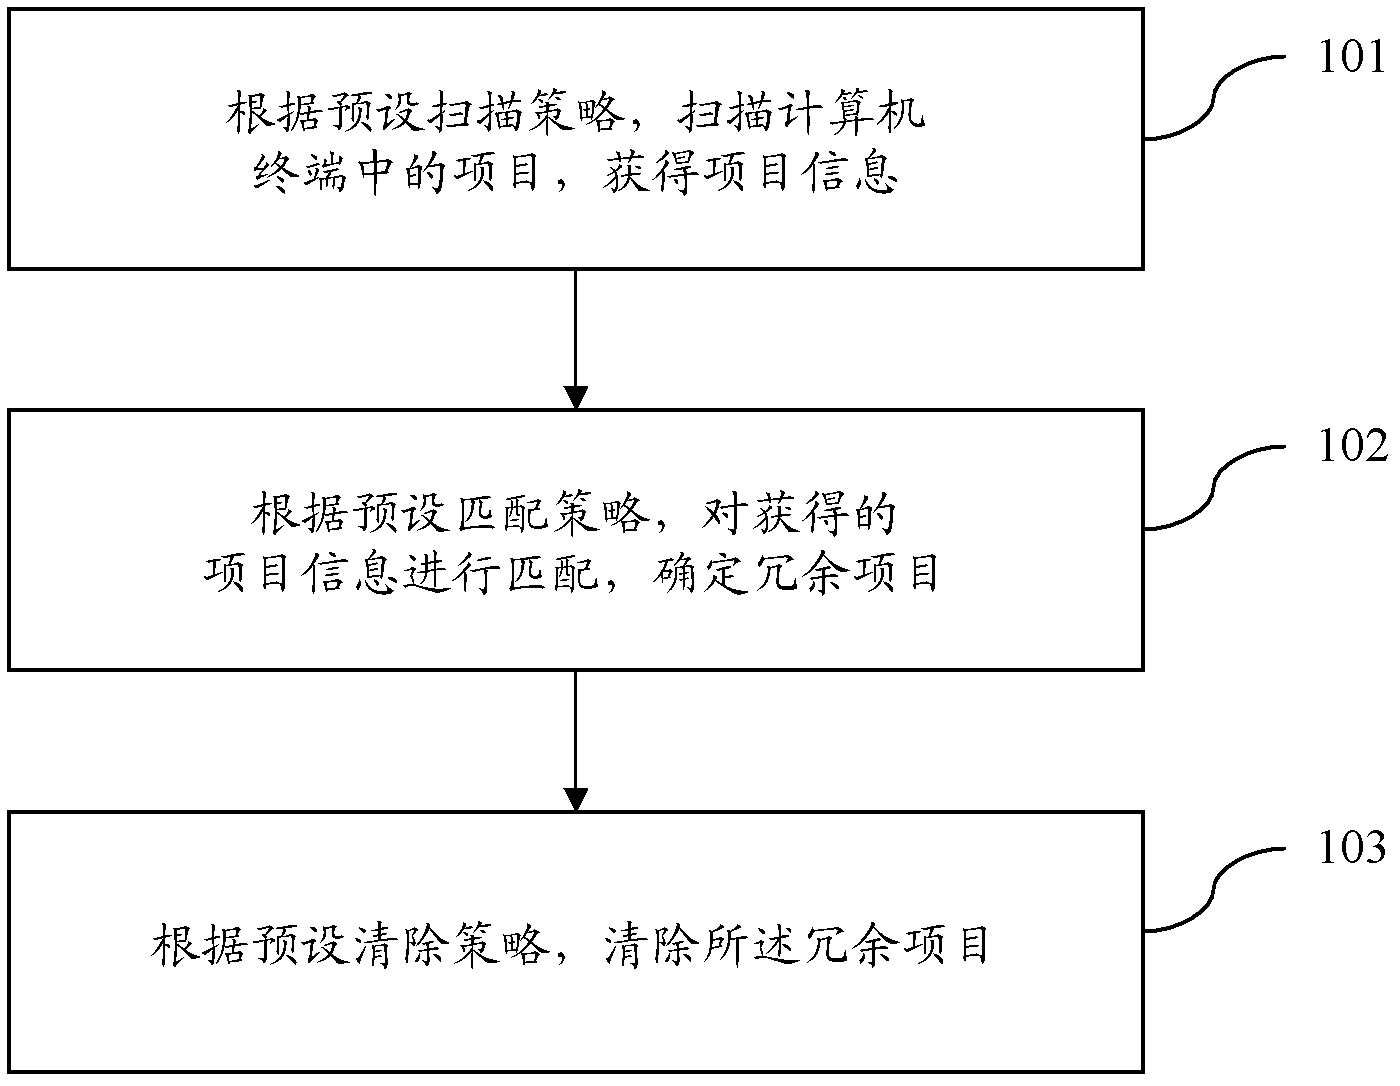 Method and system for automatically cleaning redundant items in computer terminal